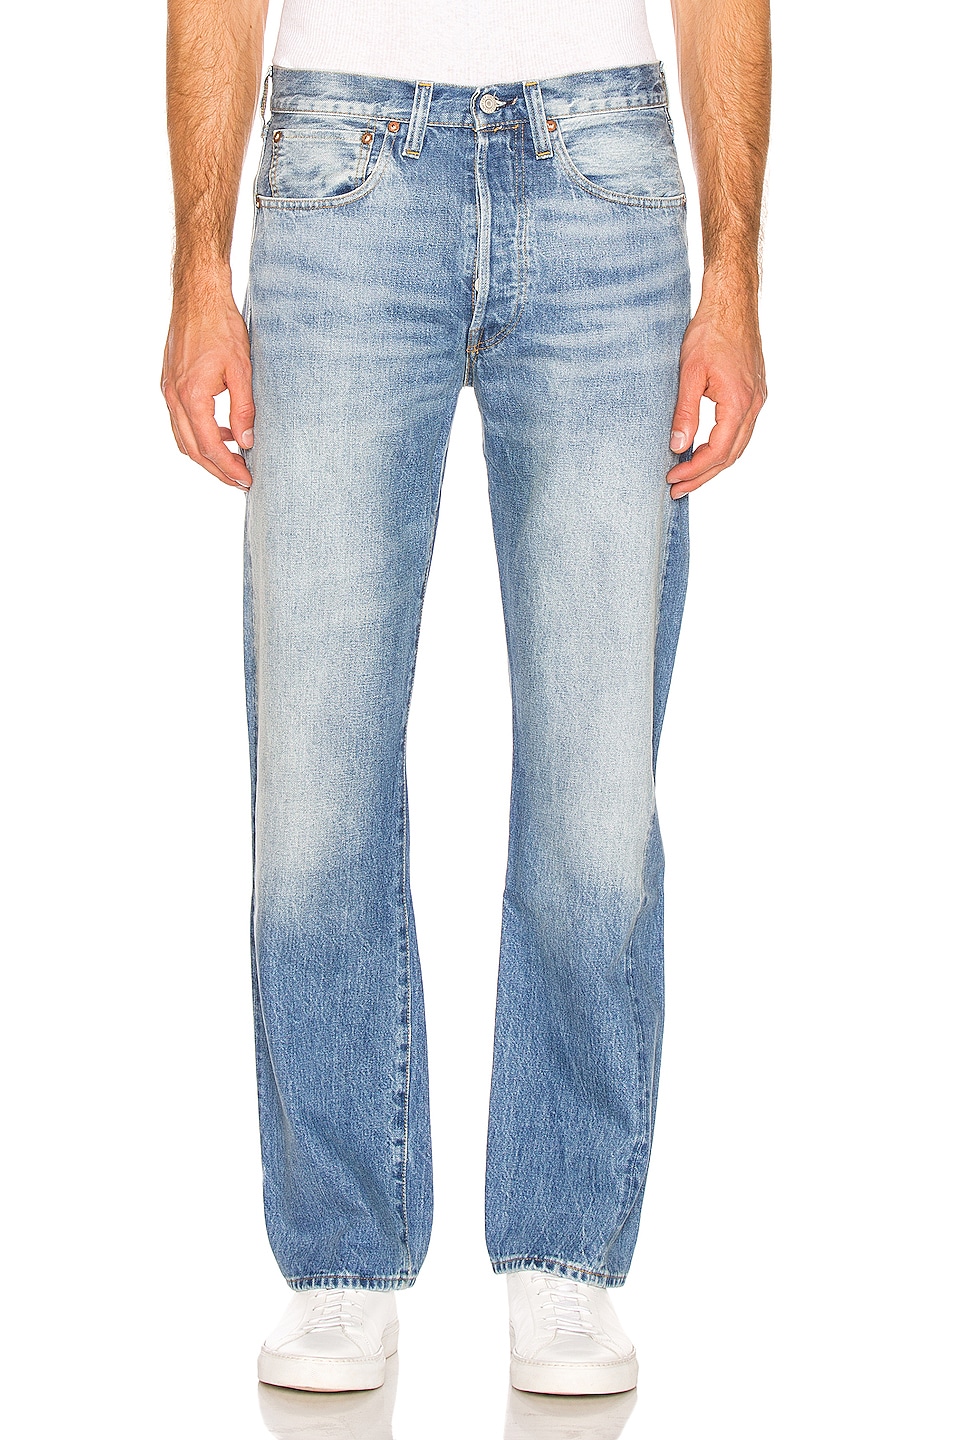 Image 1 of LEVI'S Vintage Clothing 1947 501 Jeans in Moon Rock